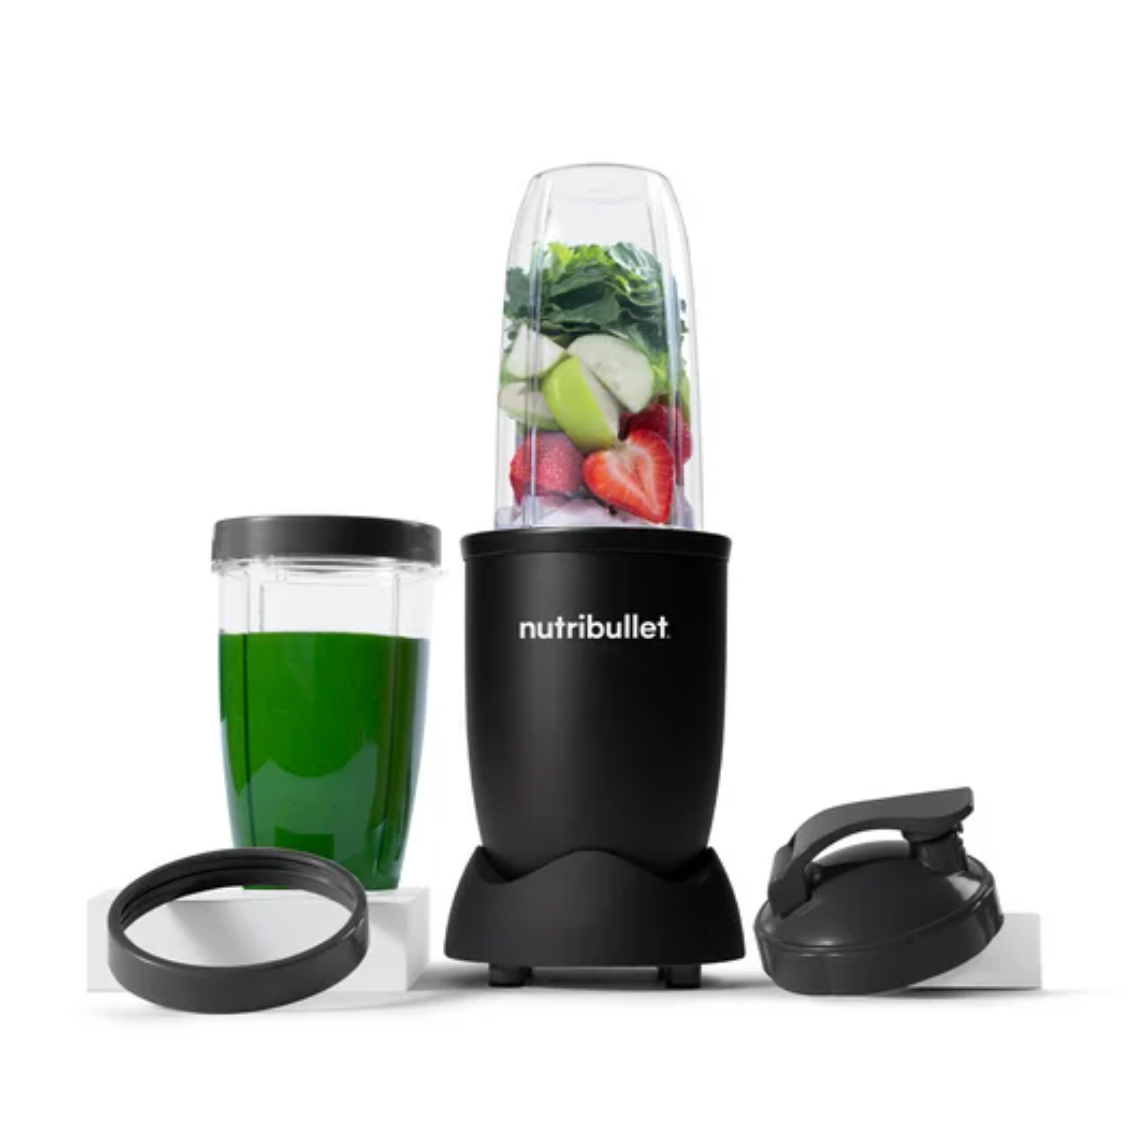 The official #1 Best Selling Portable Blender